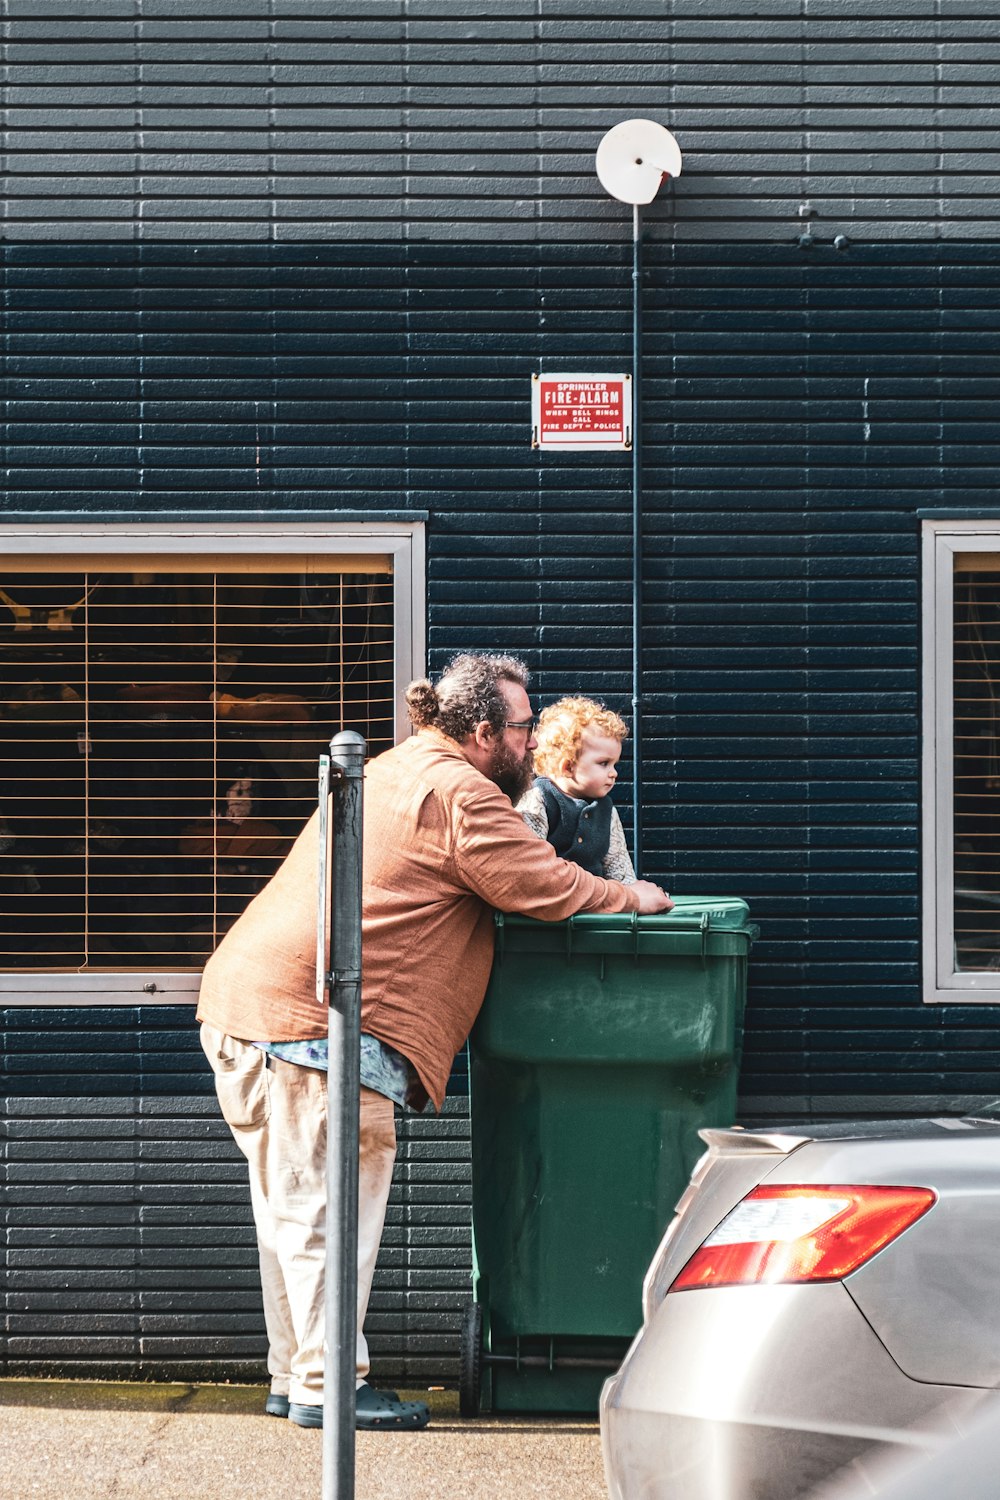 a man standing next to a child near a trash can